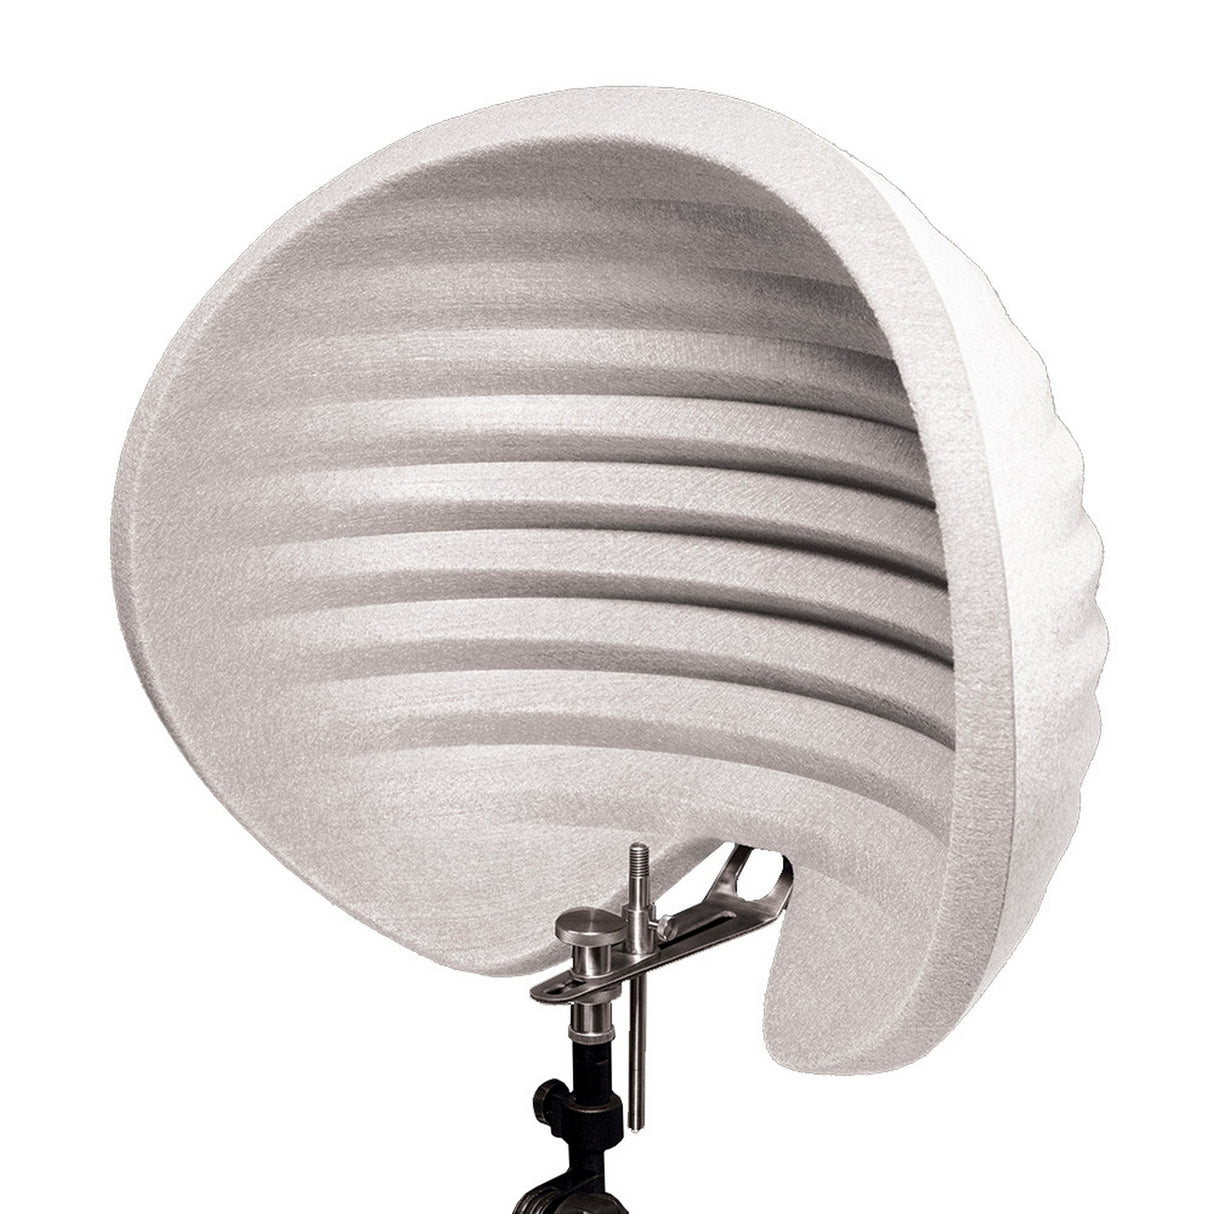 Aston Microphones Halo Ghost Reflection Filter and Portable Vocal Booth, White